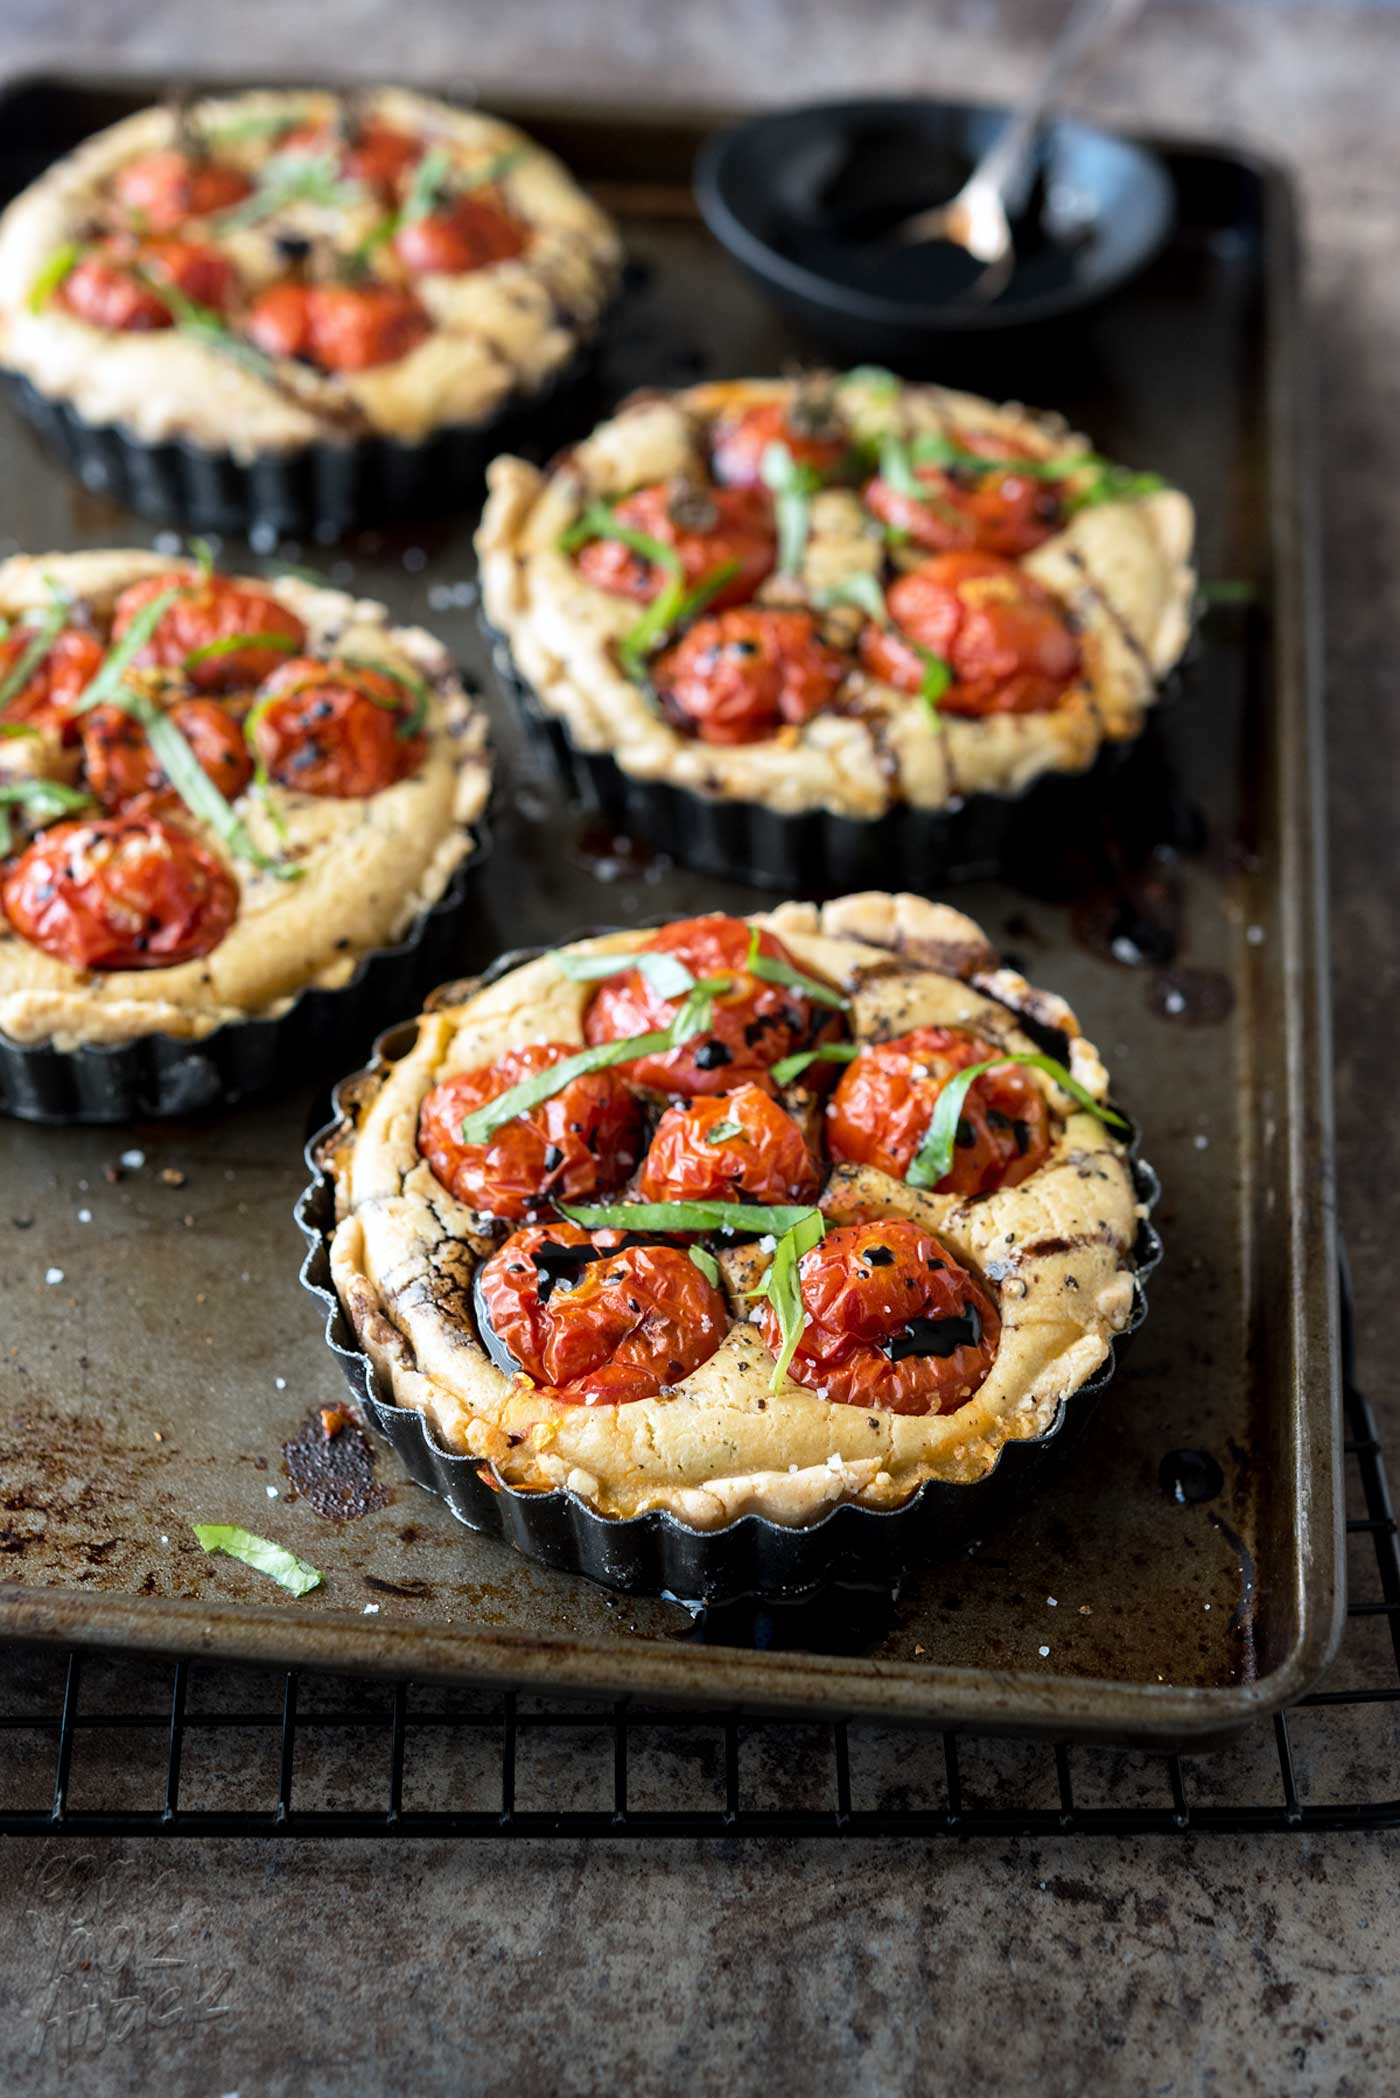 Creamy Tomato Basil Tartlets! Summer is coming to an end, so use up some of those tasty, garden-fresh tomatoes in these delicious, gluten-free, soy-free tartlets! #vegan #veganyackattack